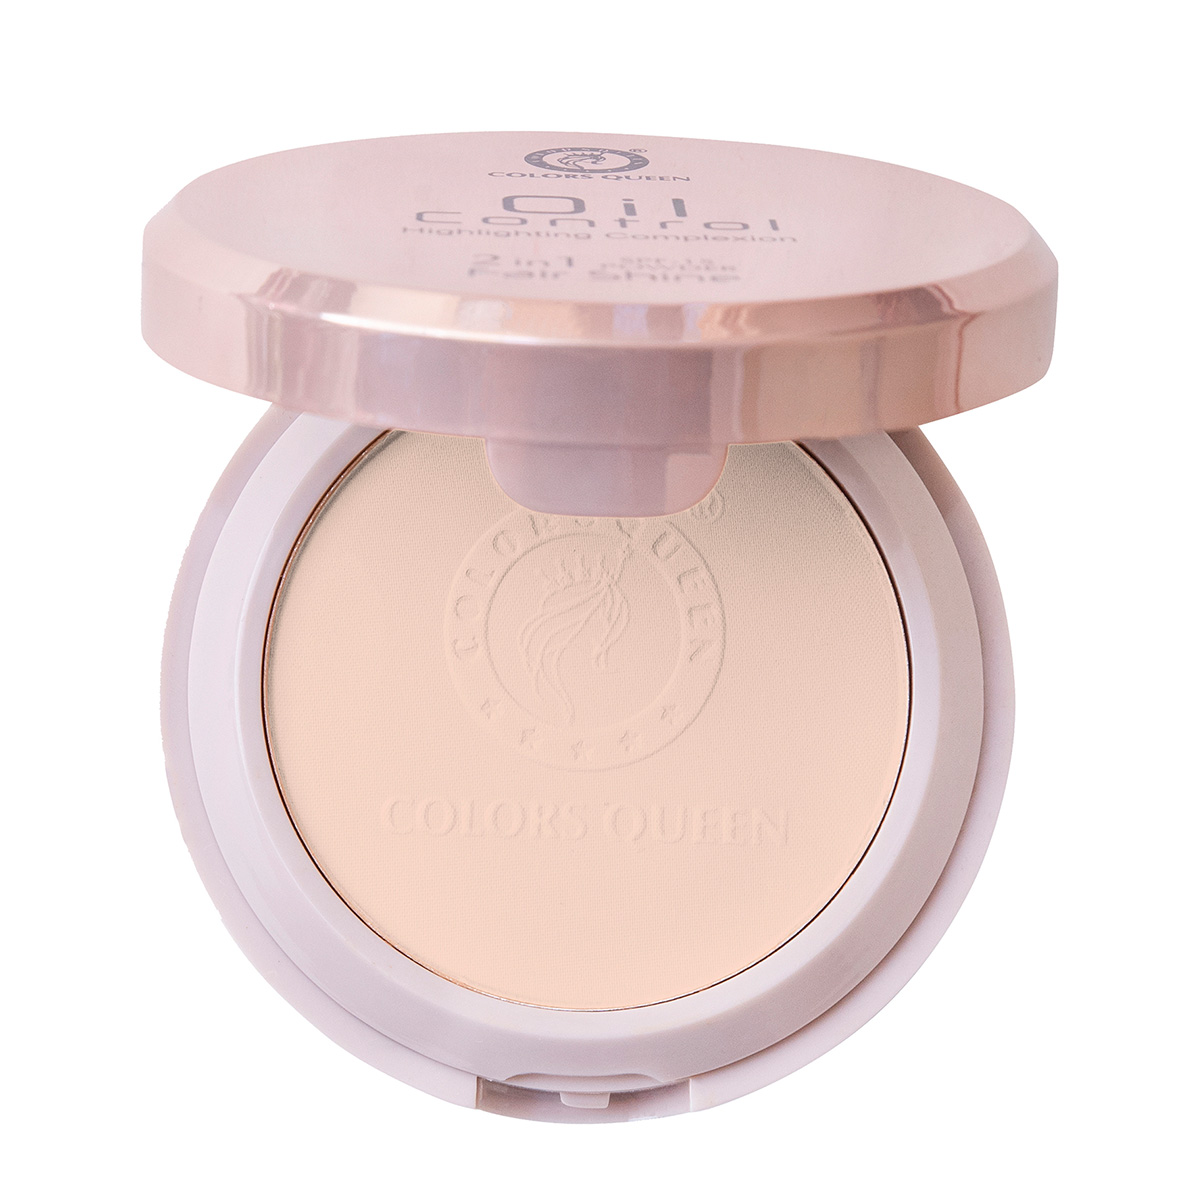 Colors Queen Oil Control Compact Powder For Women SPF 15 - 02, 20gm